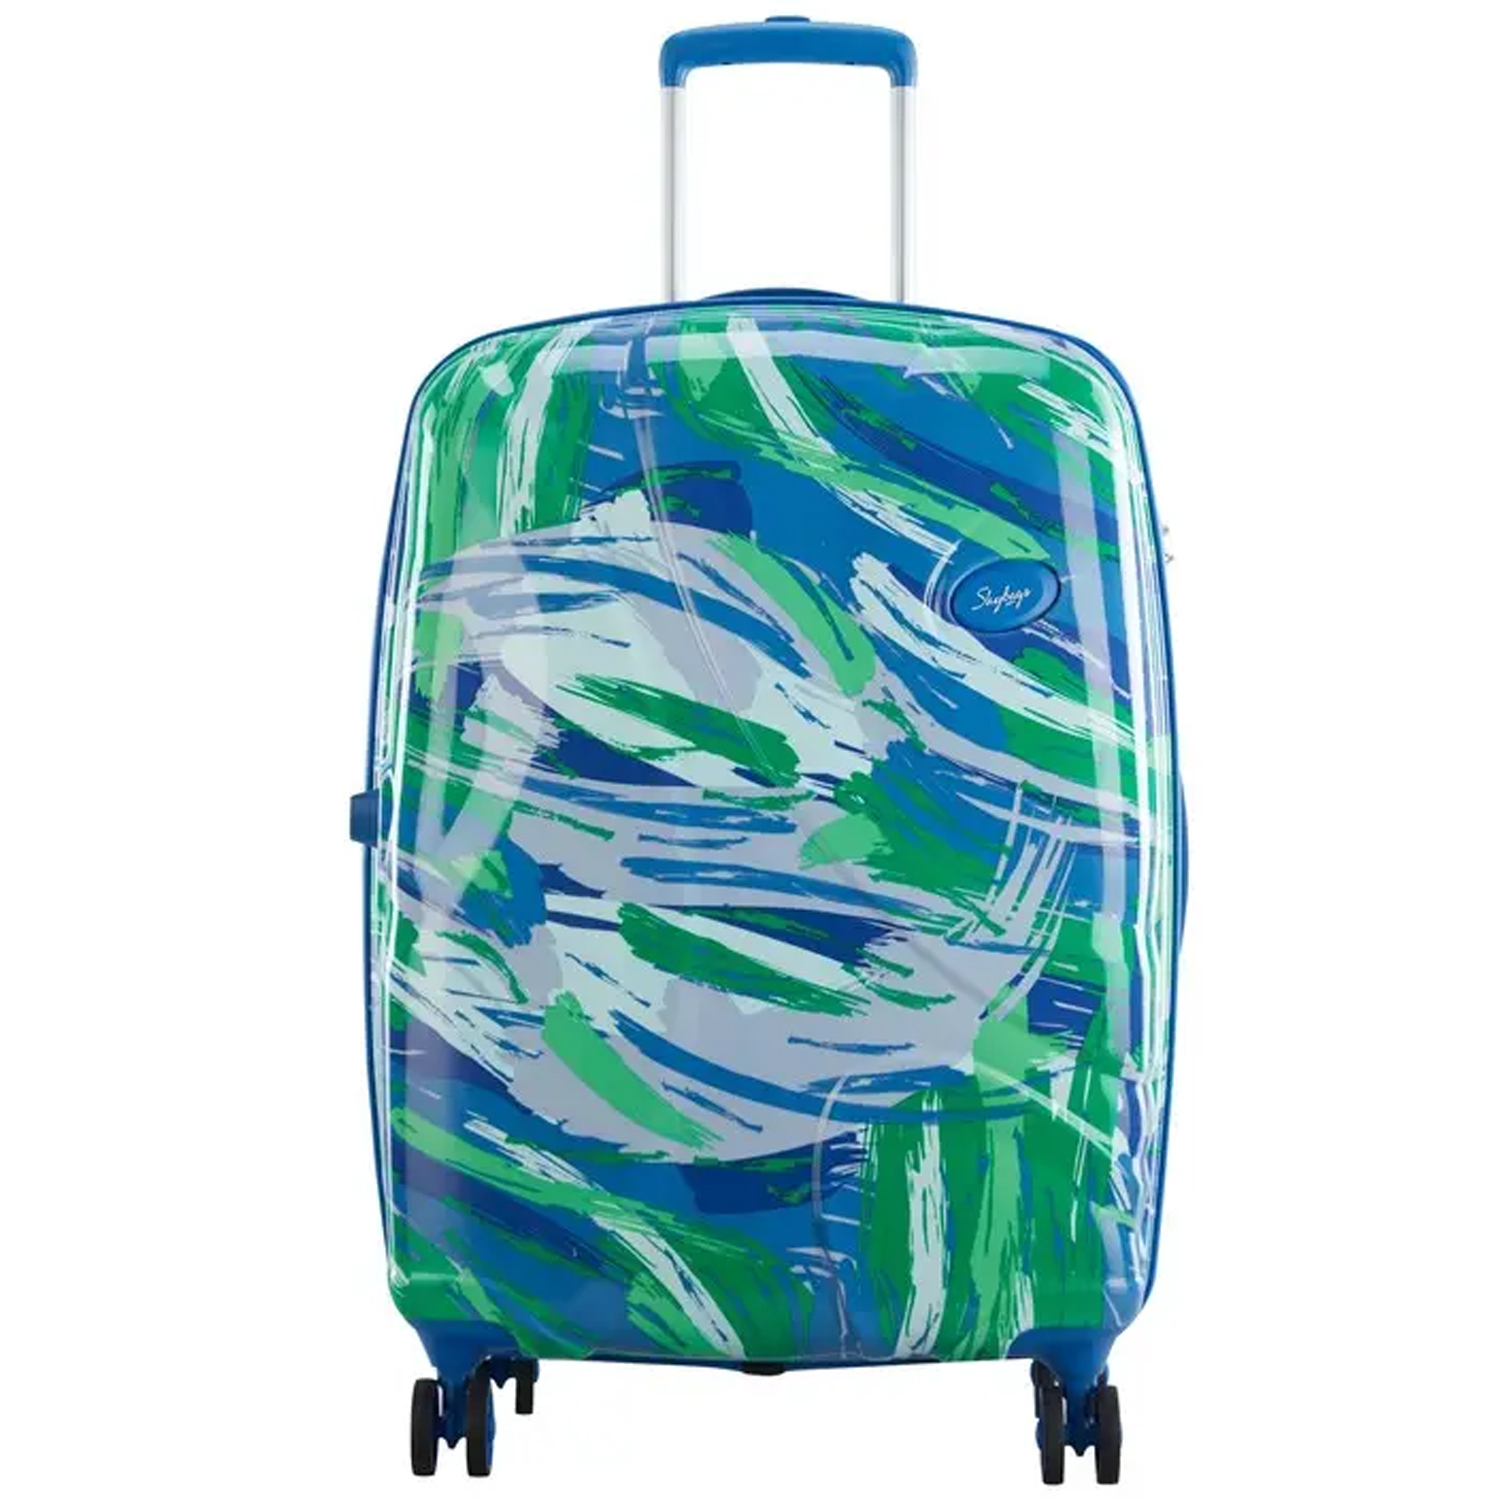 RoshanBags_SKYBAGS ABSTRACT STROLLY GREEN